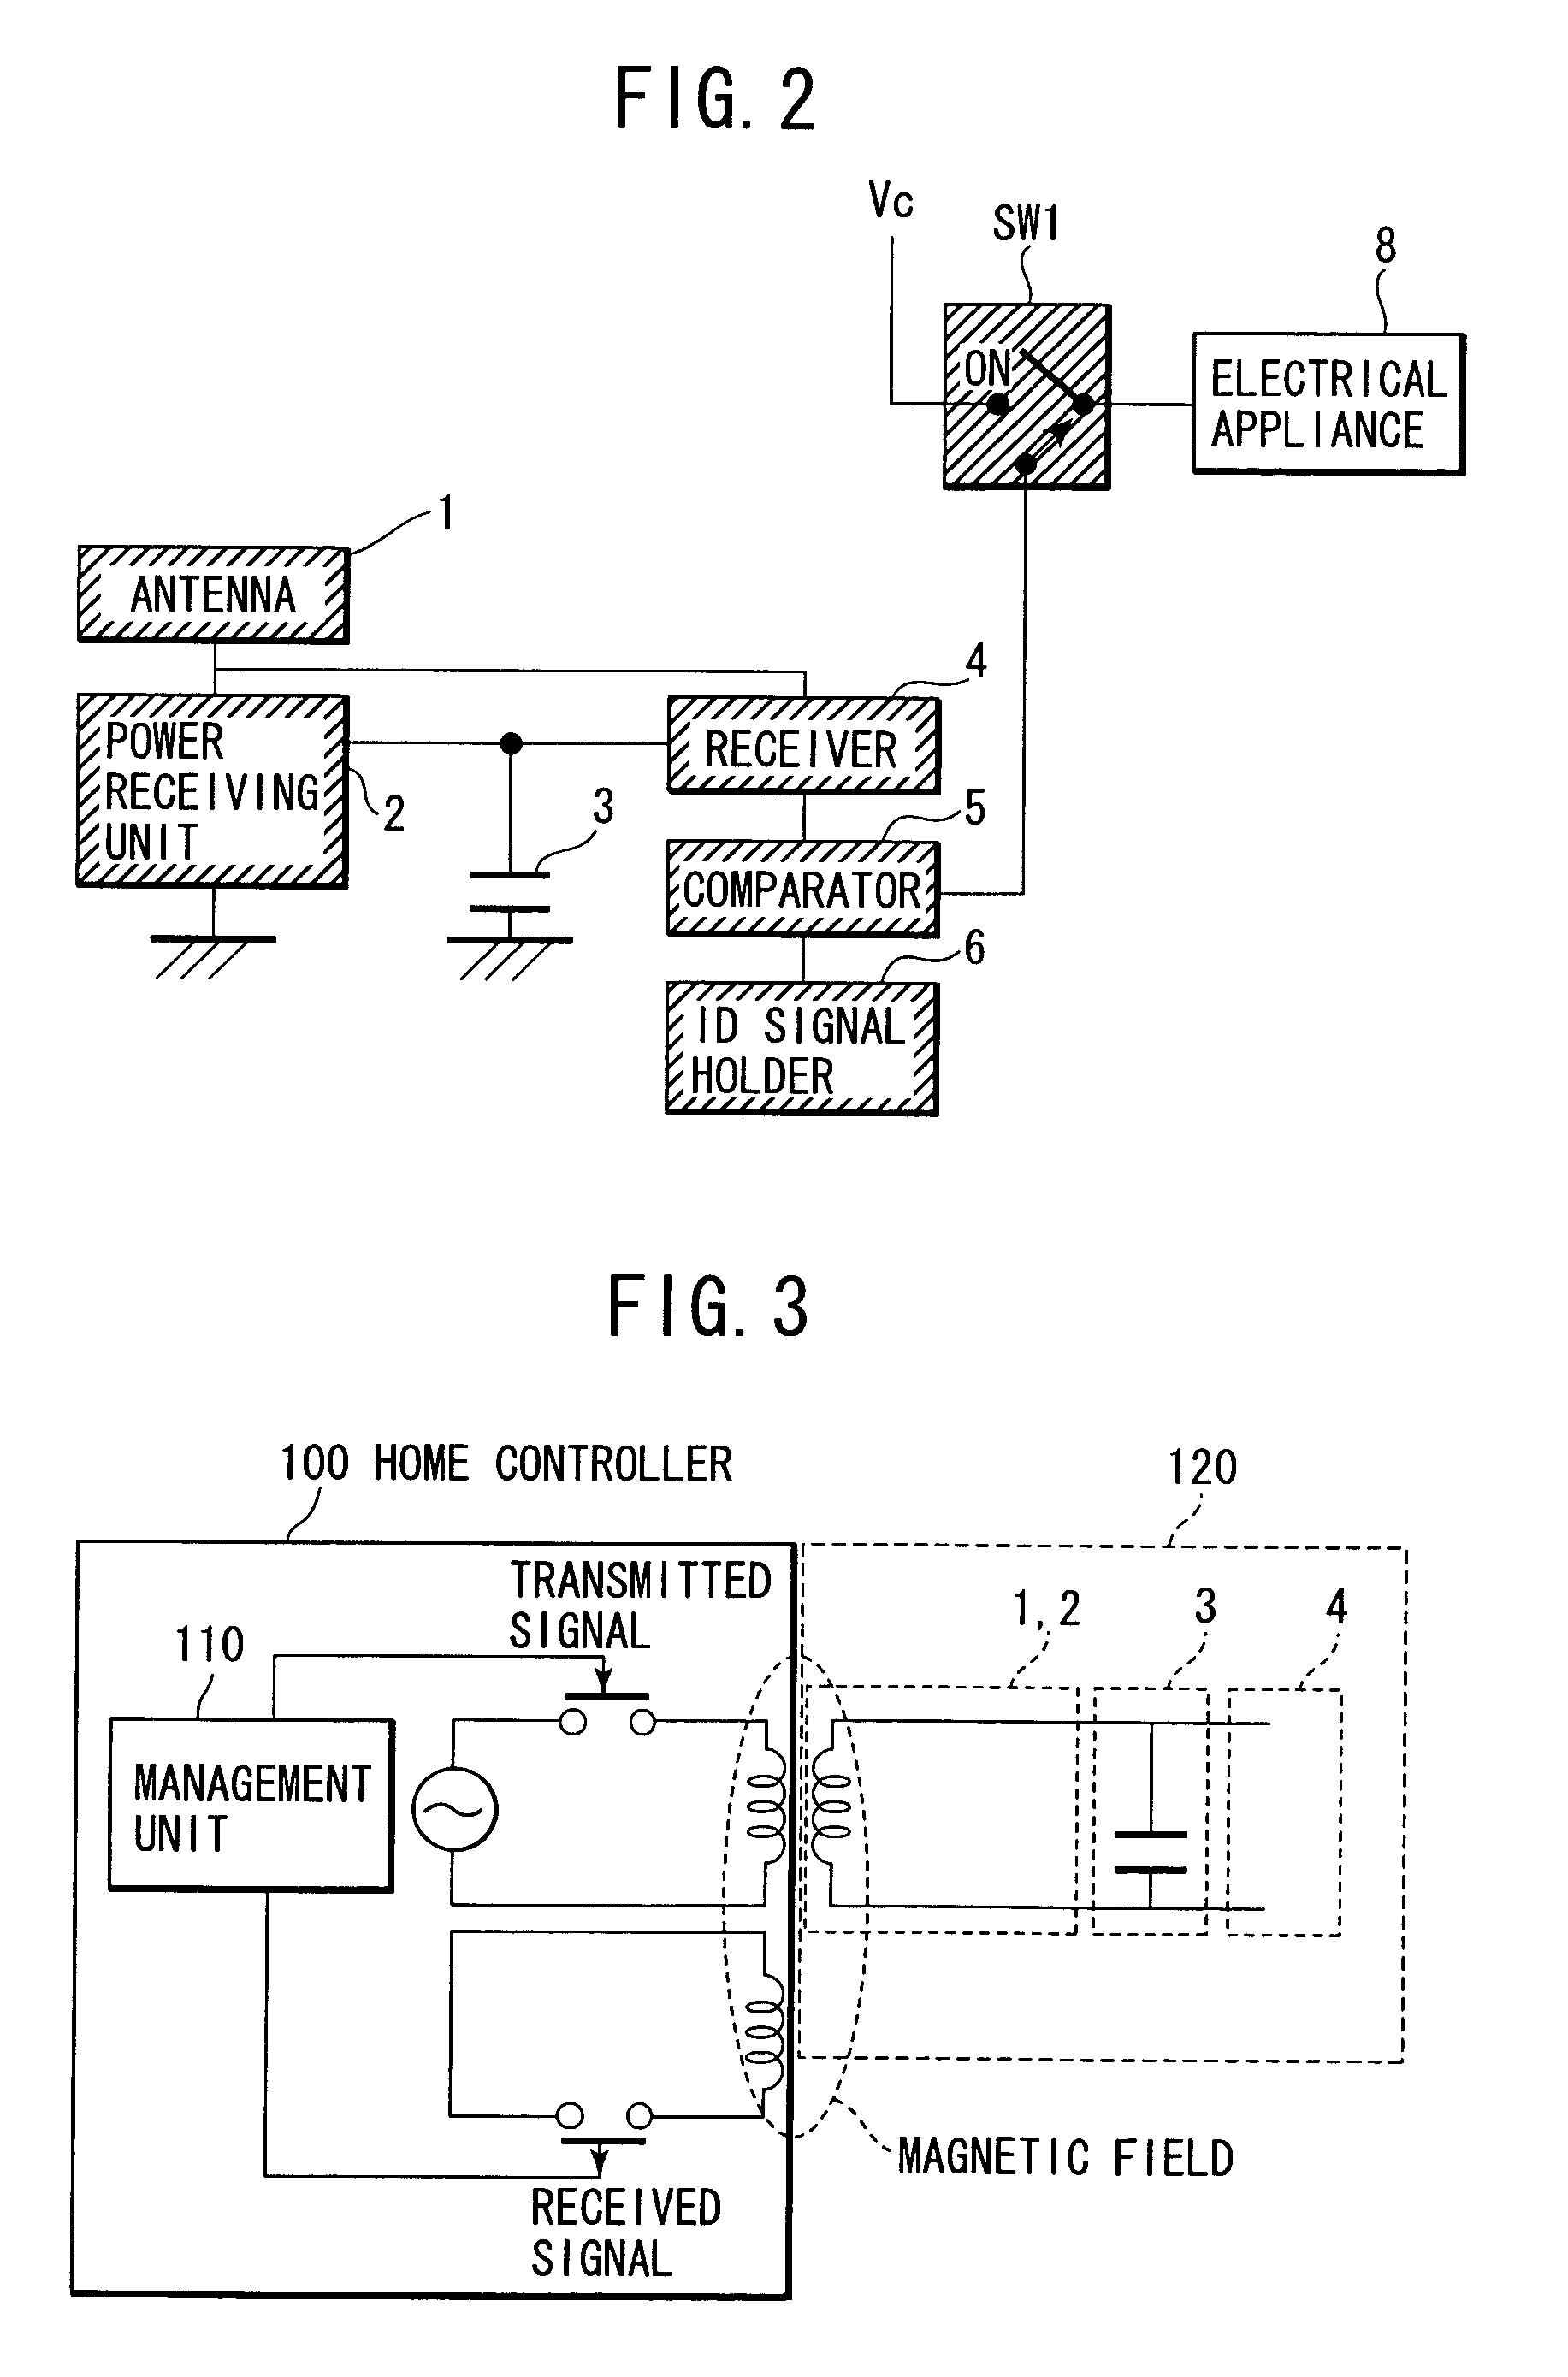 Appliance control apparatus and electrical appliance